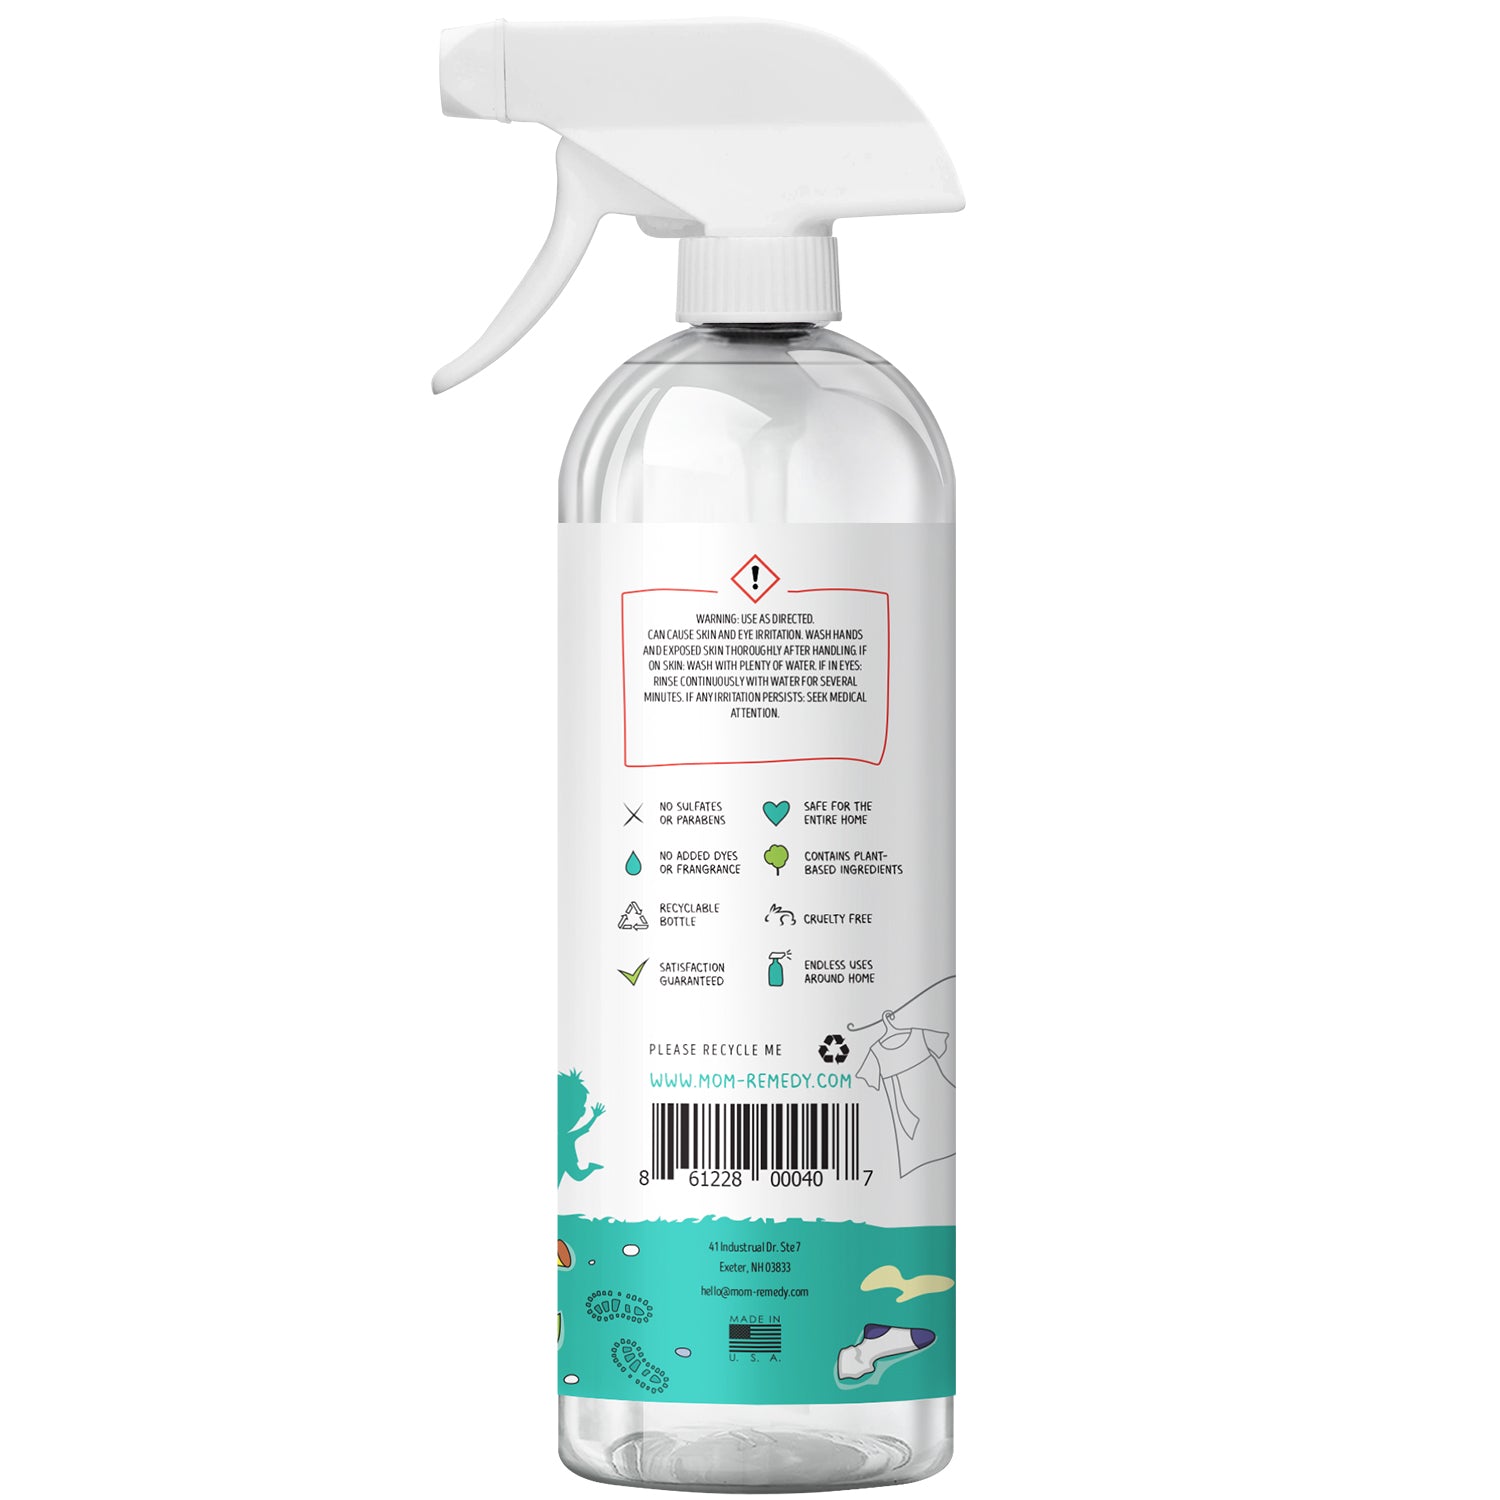 MomRemedy Hydrogen Peroxide Cleaner and stain remover for stains, spills, dirt. grime, pet messes, odors. Great for kitchens and everything household. Ingredients you can trust.